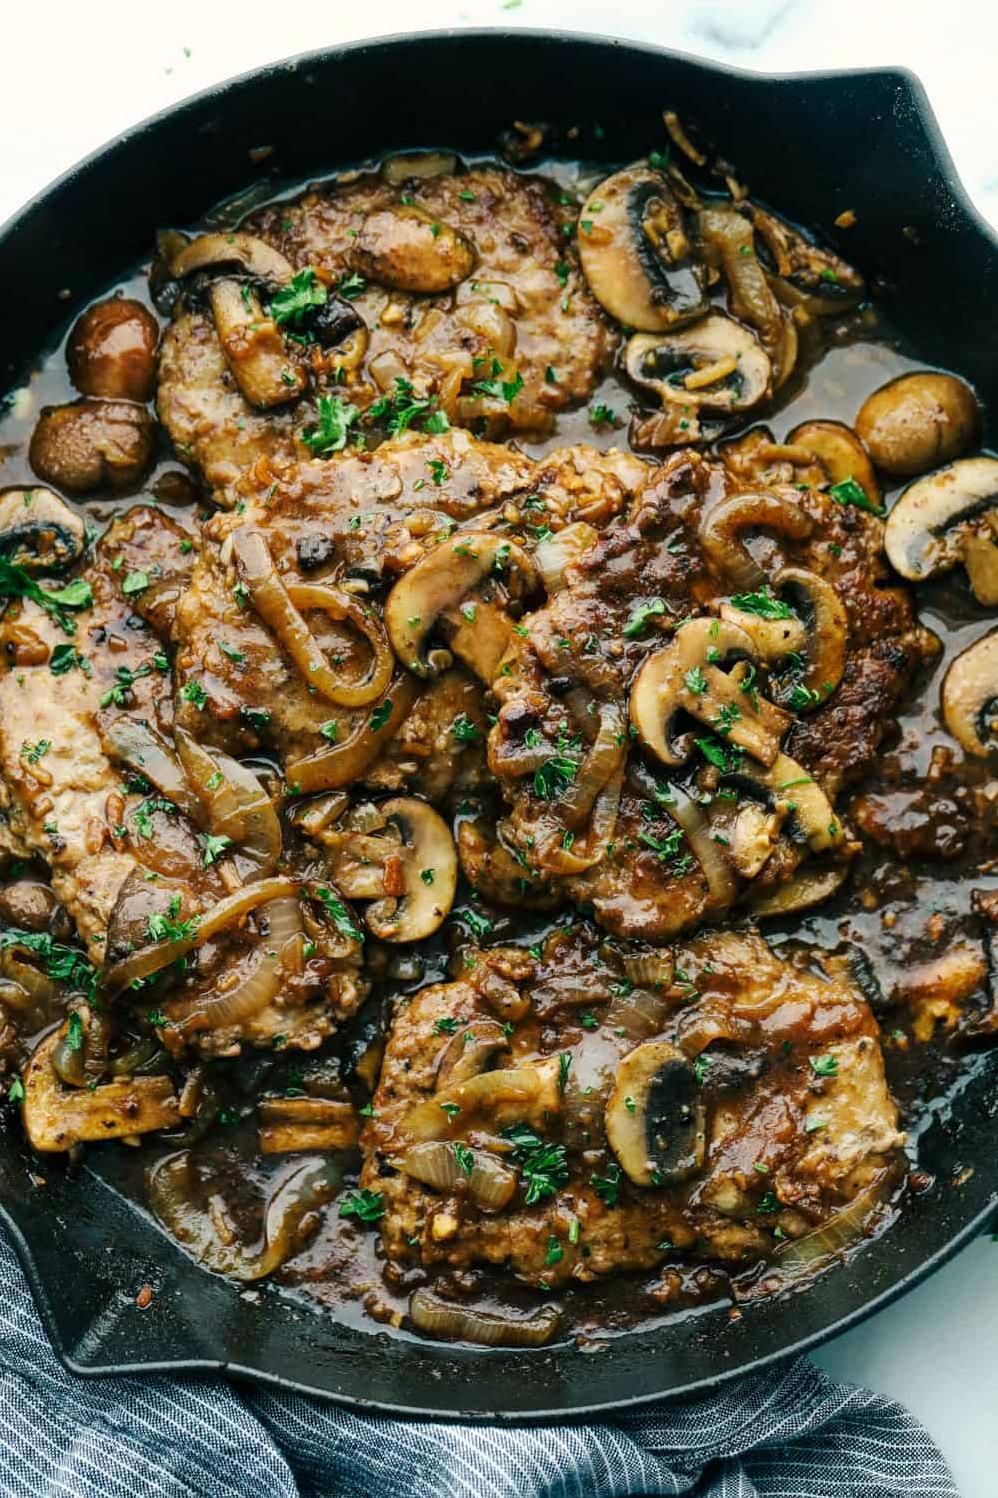 Minute Steak With Wine, Mushrooms and Onion